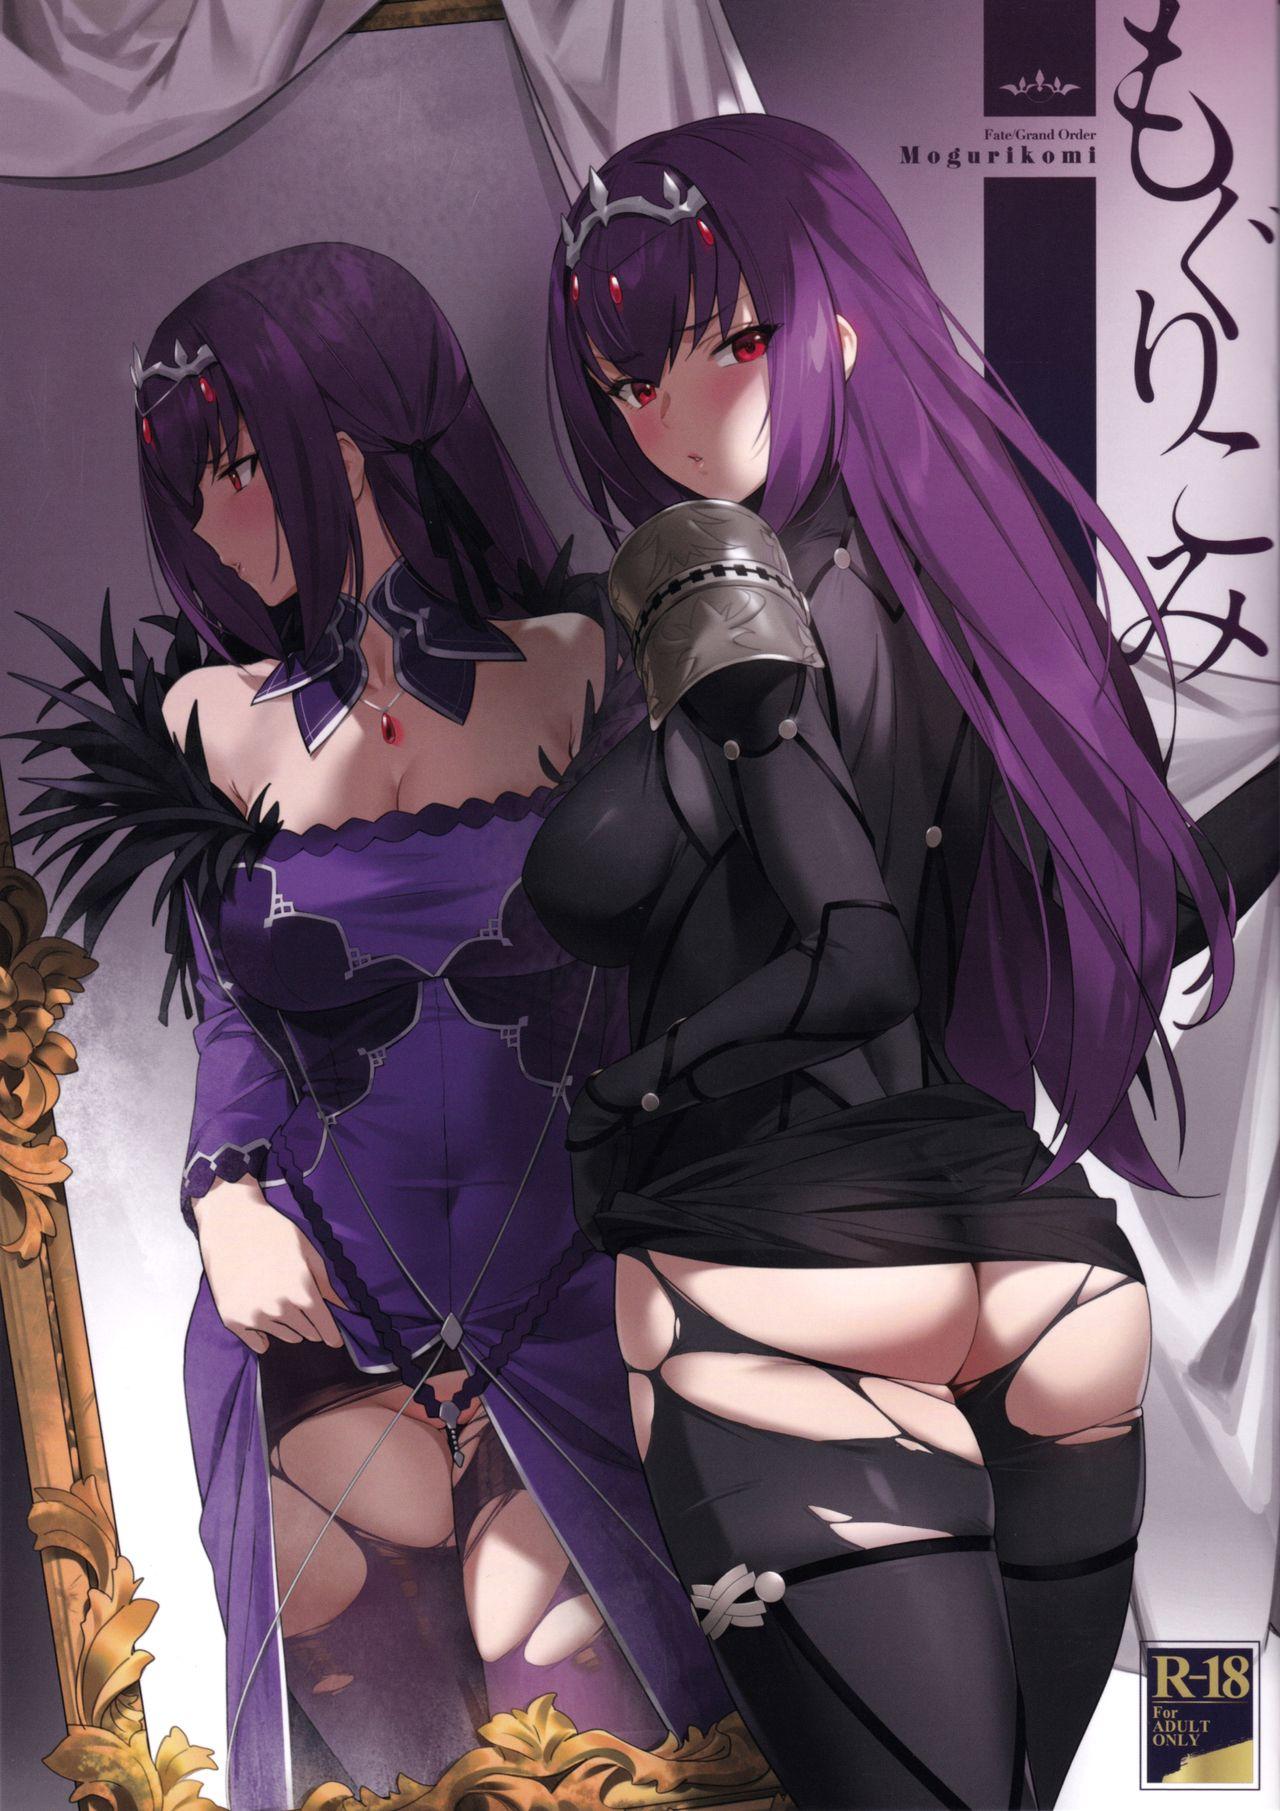 Webcamchat Mogurikomi | Sneaking in - Fate grand order Big Tits - Picture 1